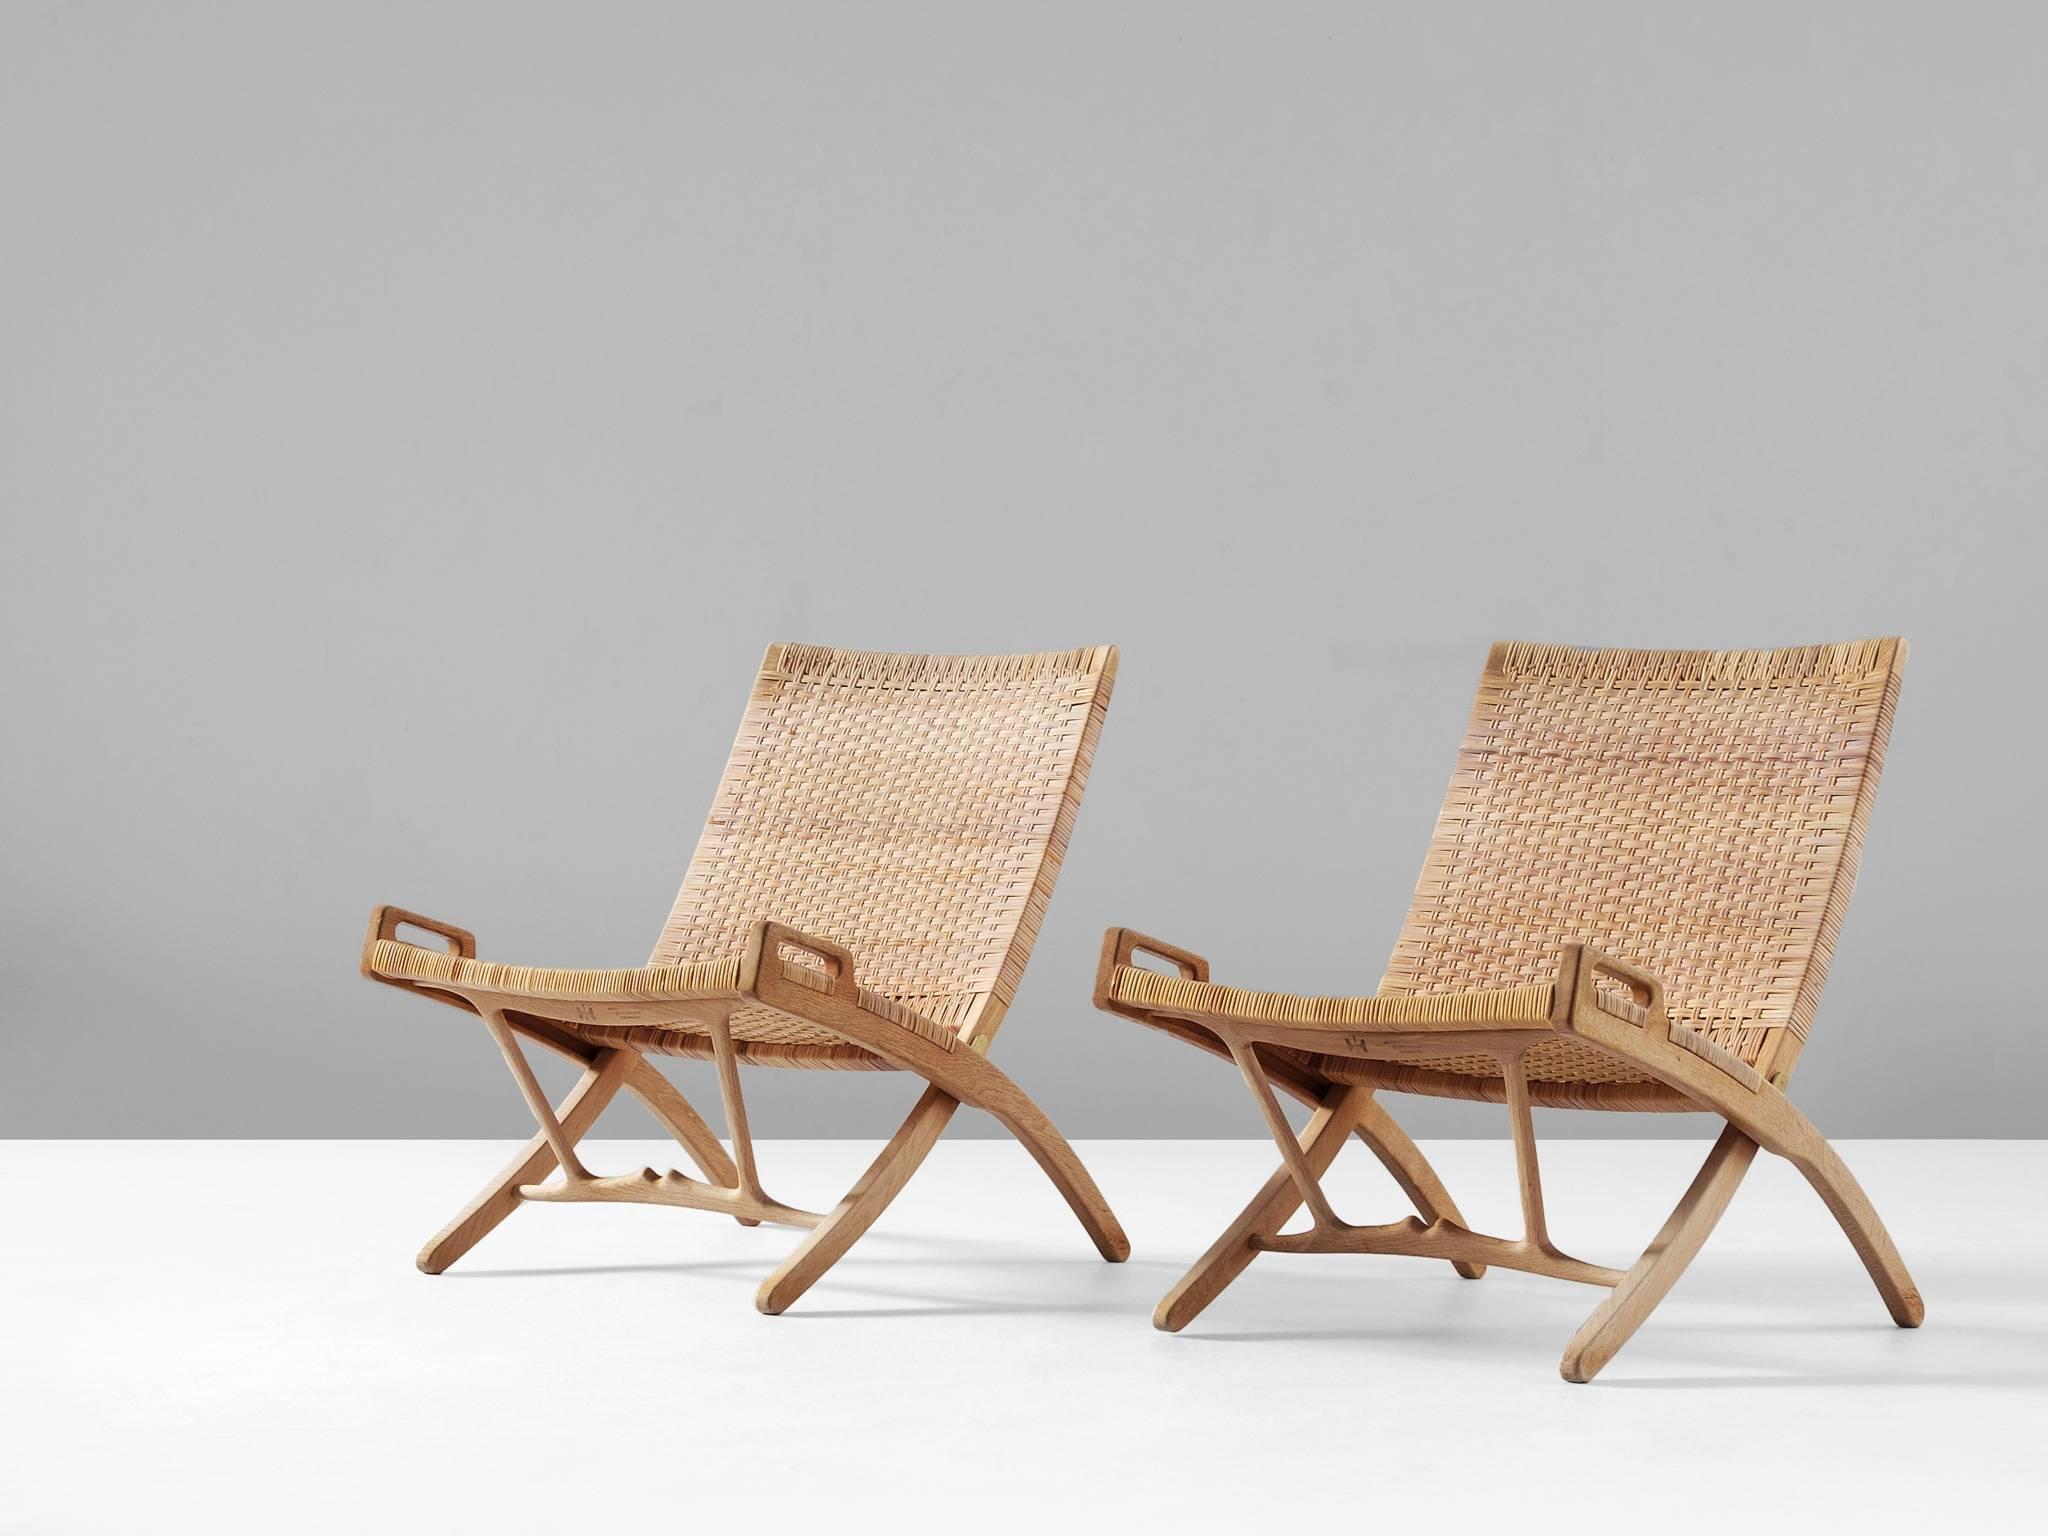 Pair of folding chairs model JH512, in oak and cane, by Hans J. Wegner for Johannes Hansen, Denmark, 1949. 

These chairs were designed by Hans Wegner for the small post-war home. To save space they can be fold together and hung on the wall. At